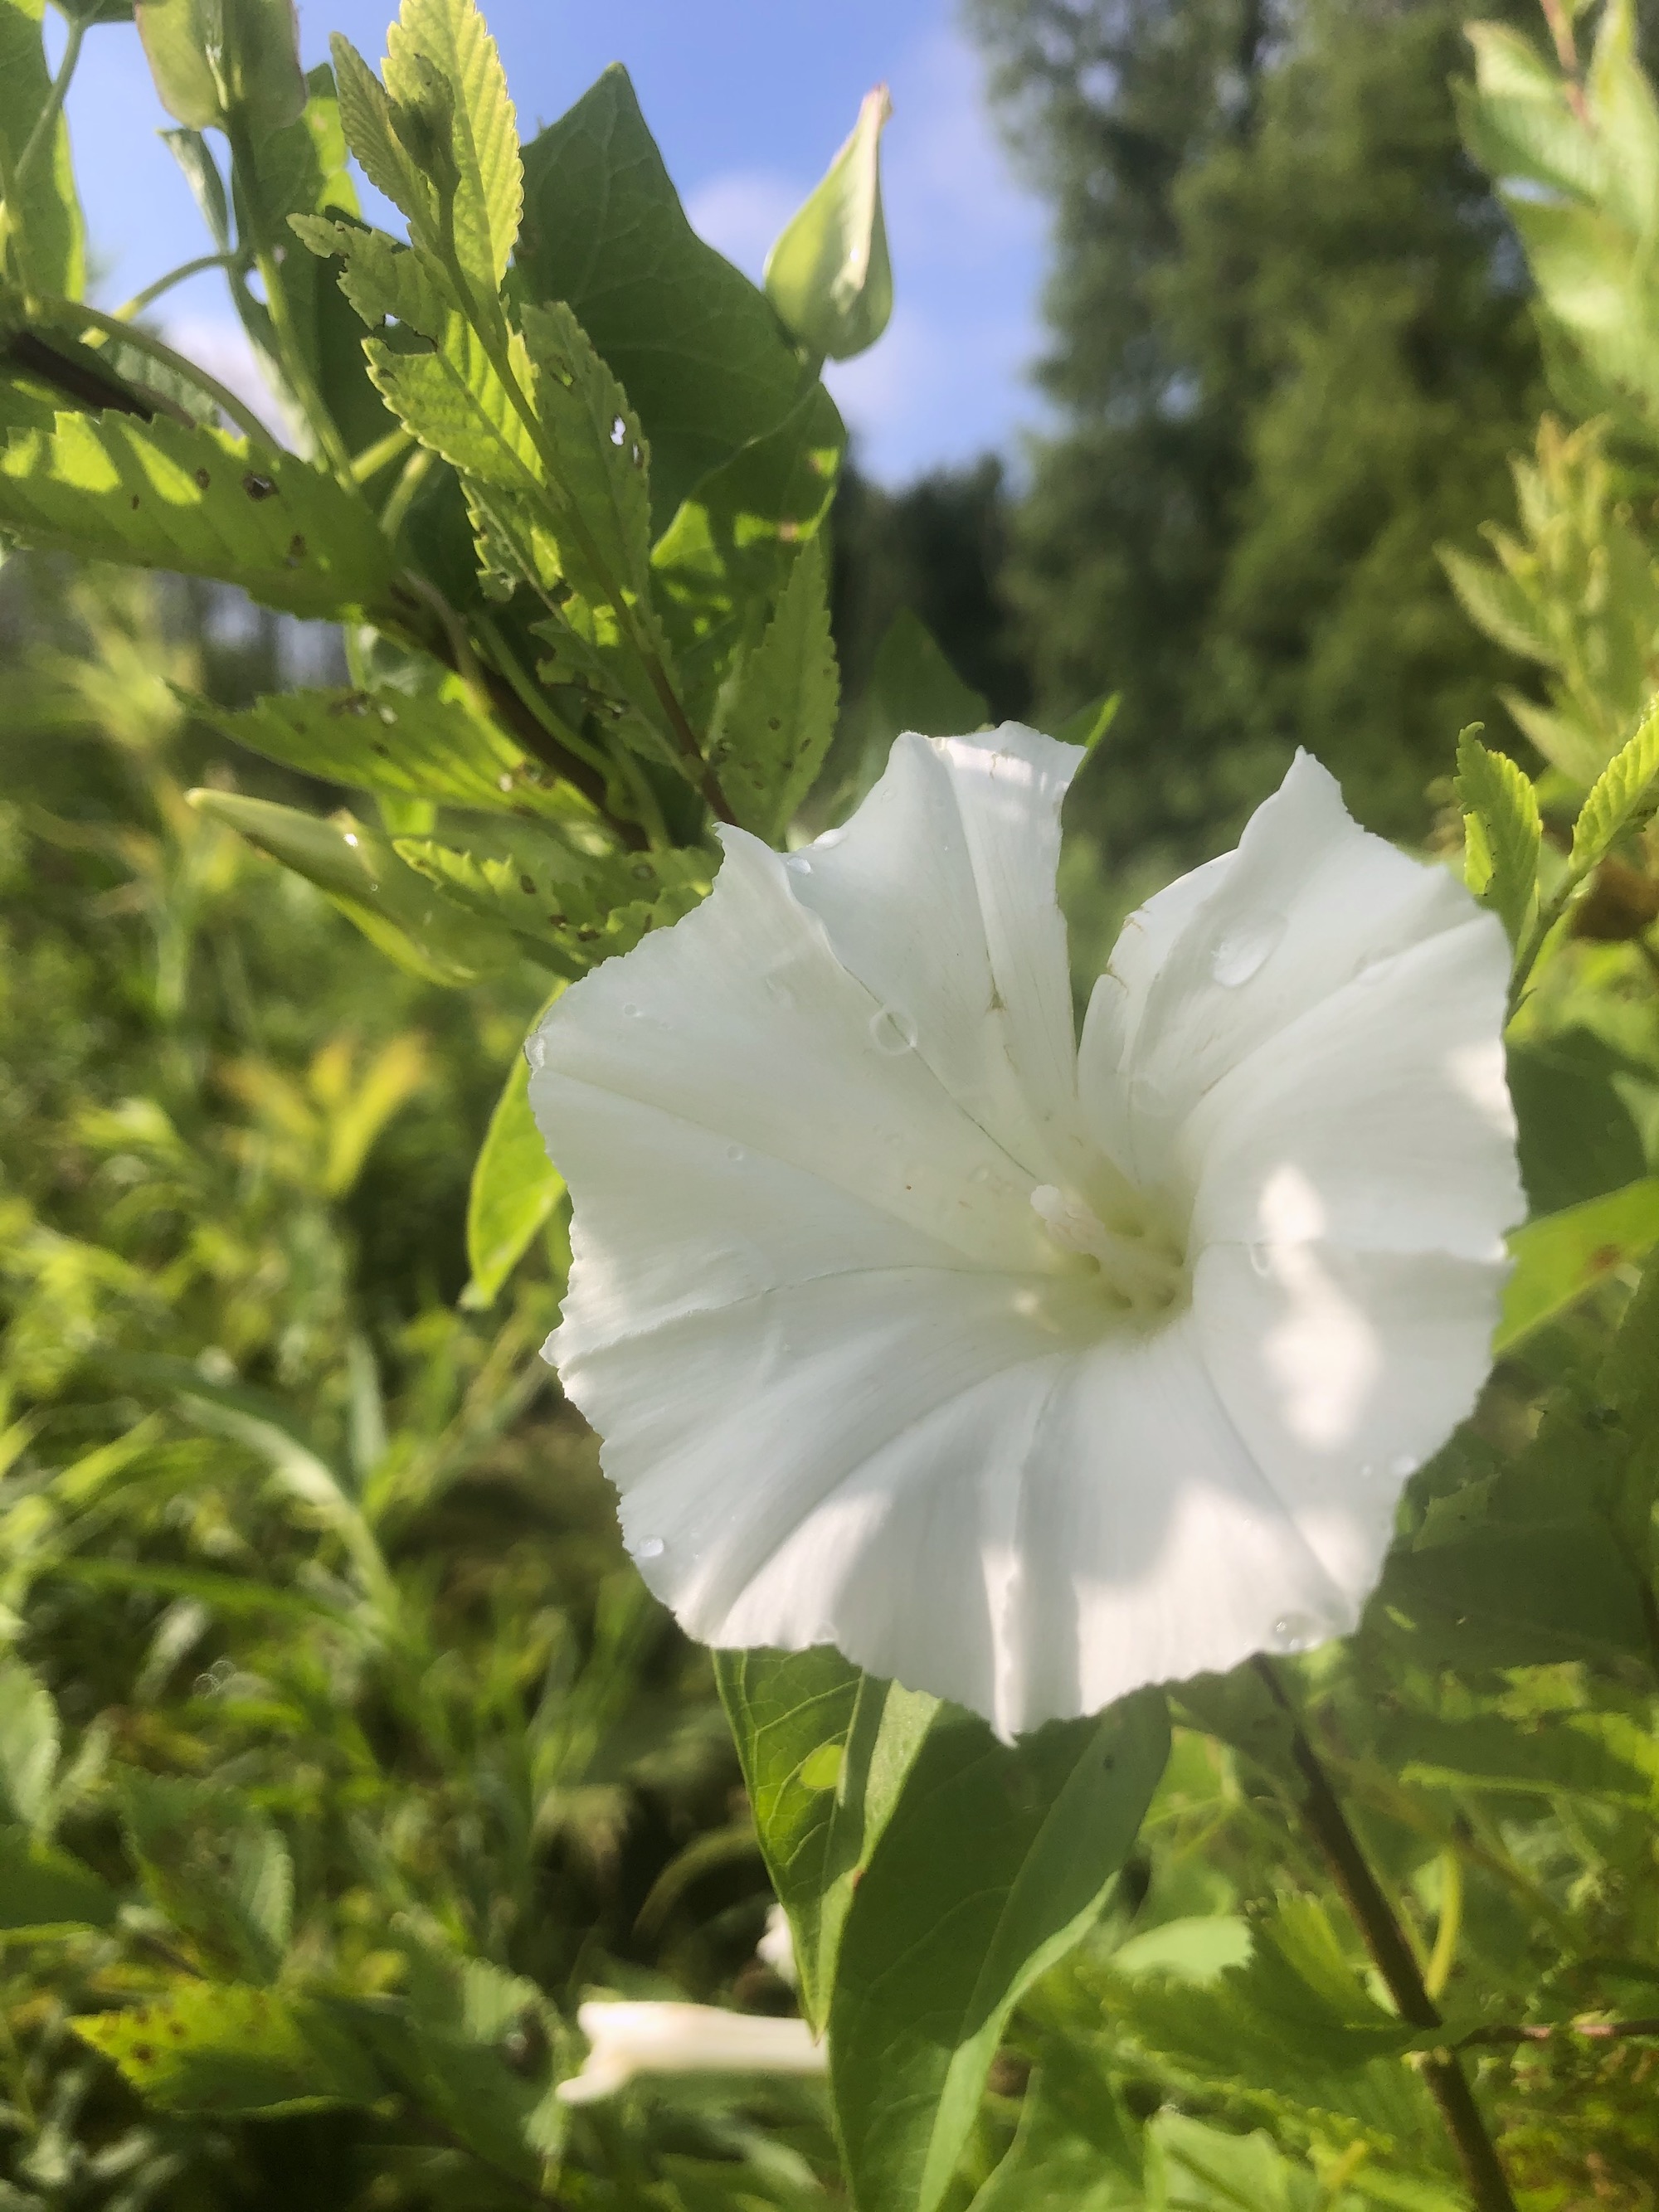 Hedge Bindweed on shore of Marion Dunn Pond in Madison, Wisconsin on July 10, 2020.